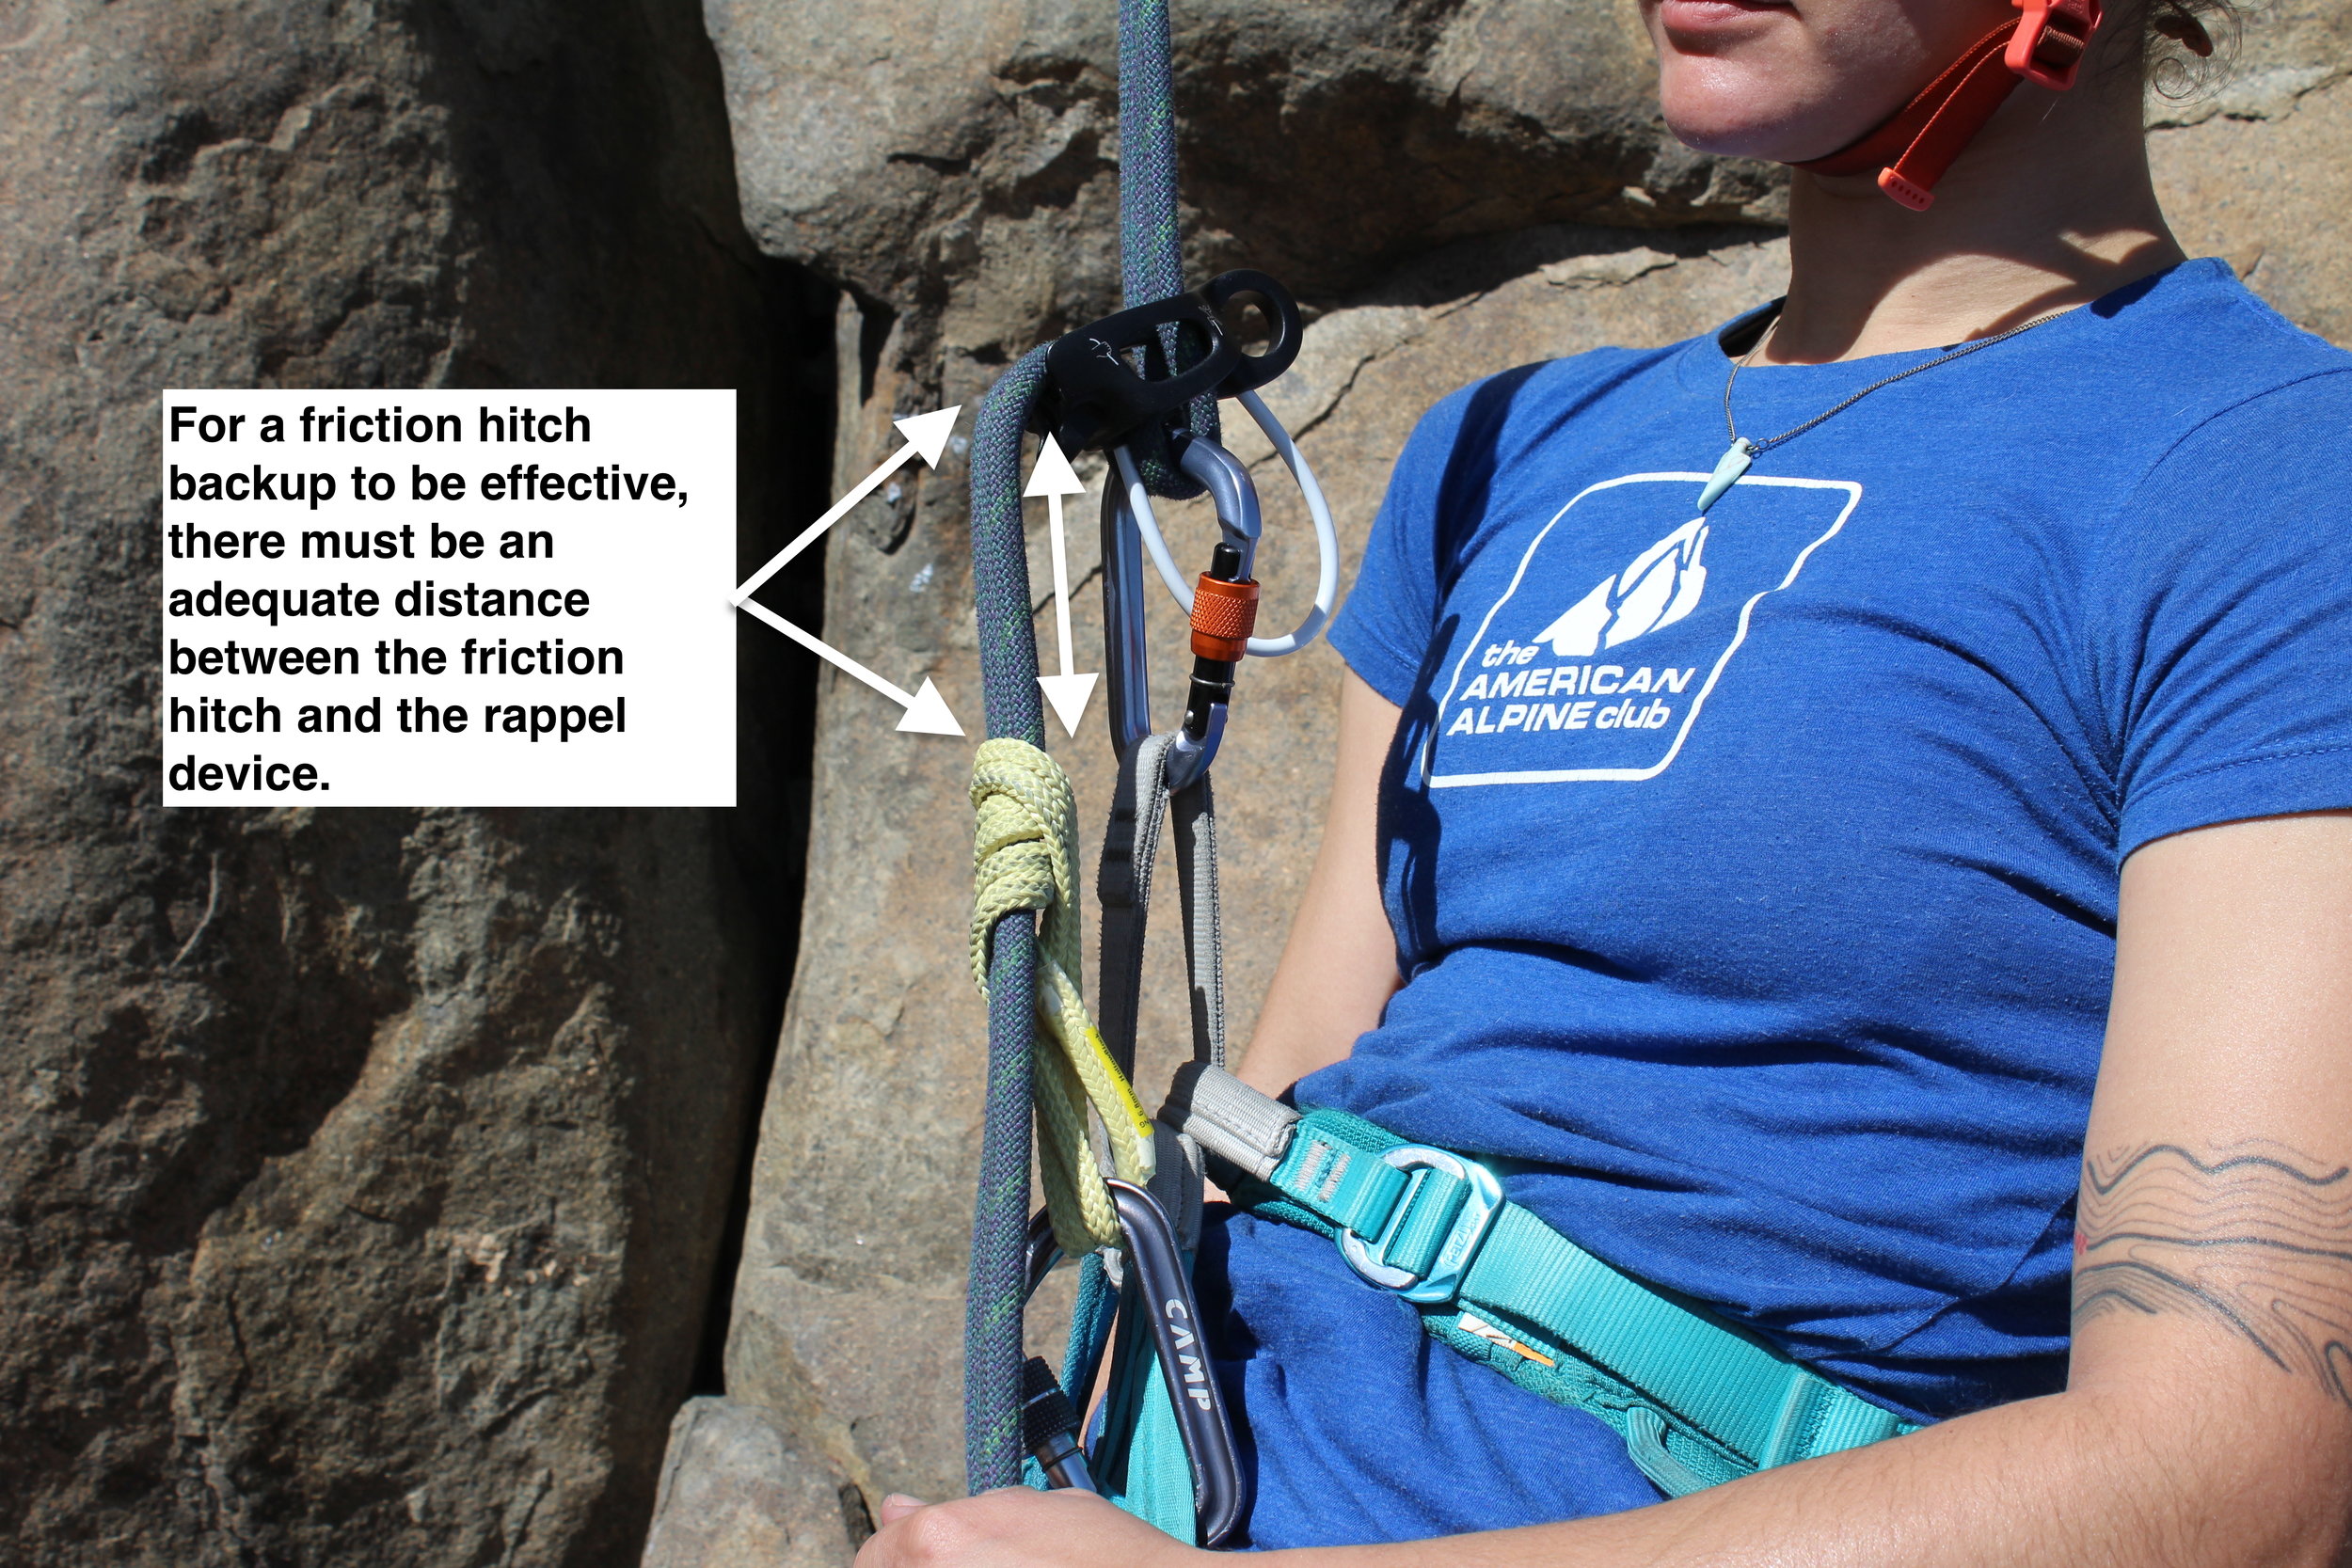 Precise rigging is vital to an effective rappel backup. &nbsp;It's not enough to apply a friction hitch; the distances and positions of all the pieces have to be just right.